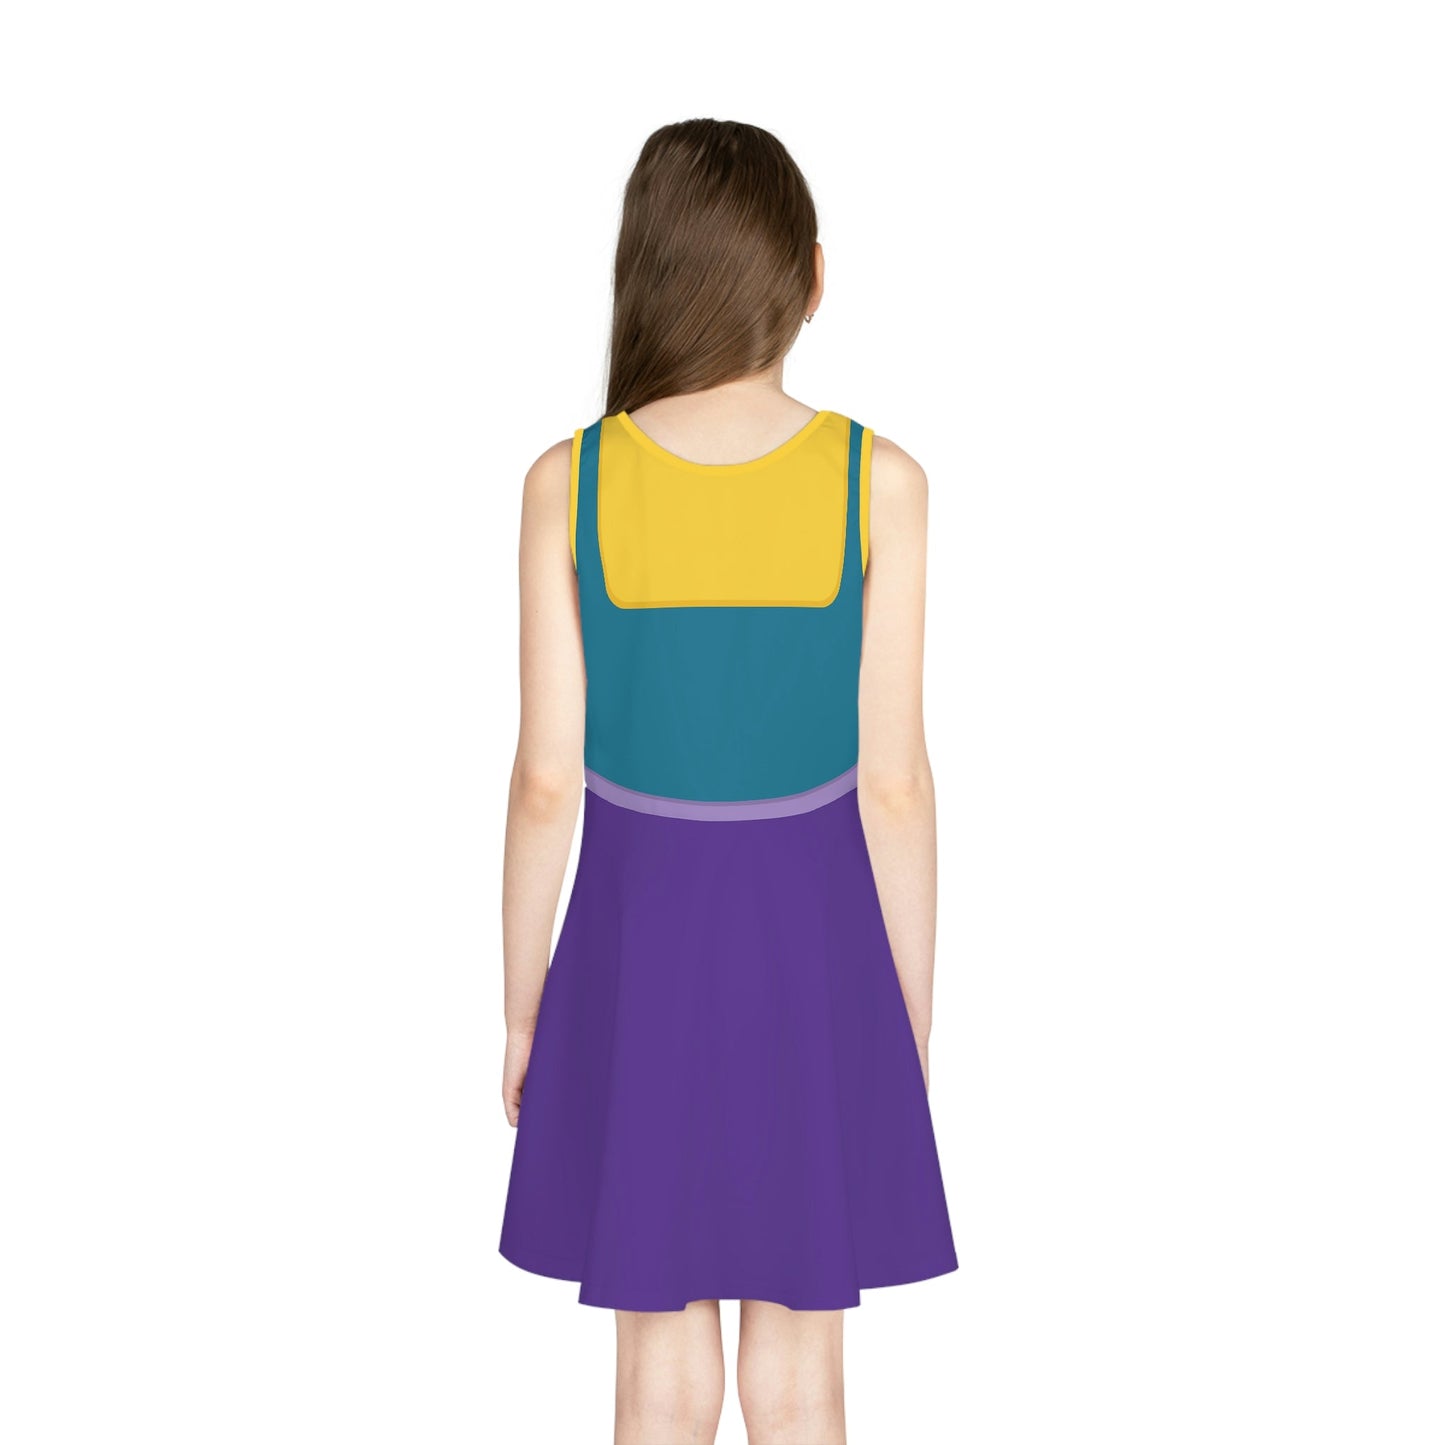 The Kronk Girls' Sleeveless Sundress All Over PrintAOPAOP Clothing#tag4##tag5##tag6#